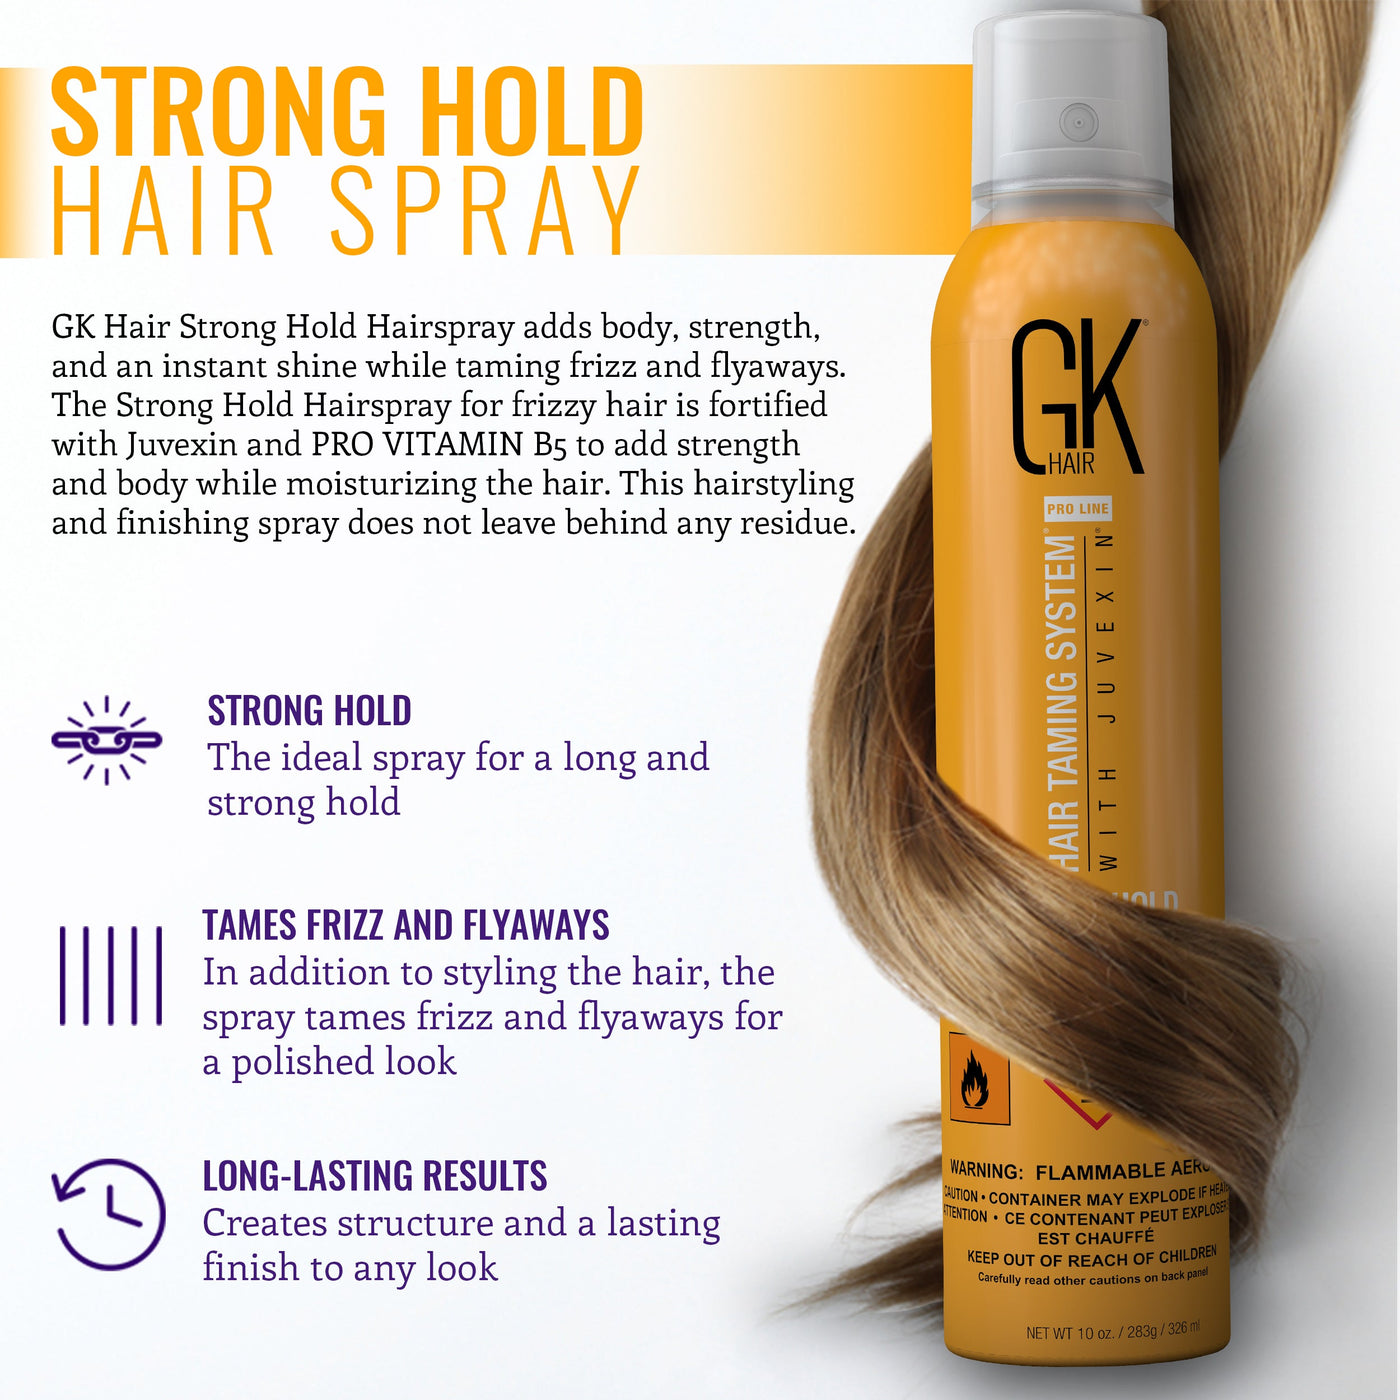 Strong Hold HairSpray